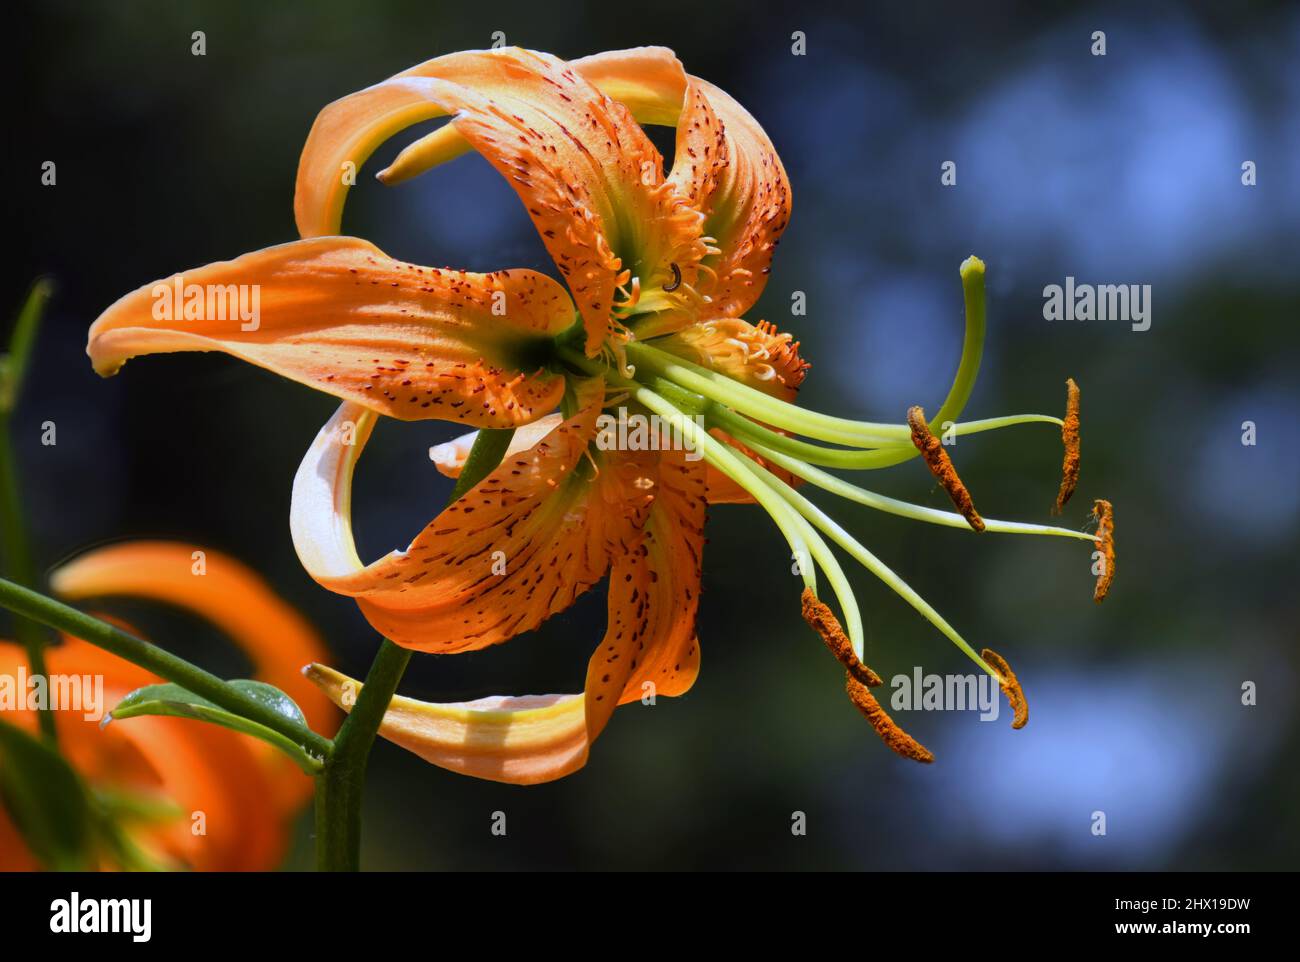 Orange Tiger Lily in late summer in the Rio grande River Valley of New Mexico. Orange is the color that indicates attaining goals and wealth. Stock Photo